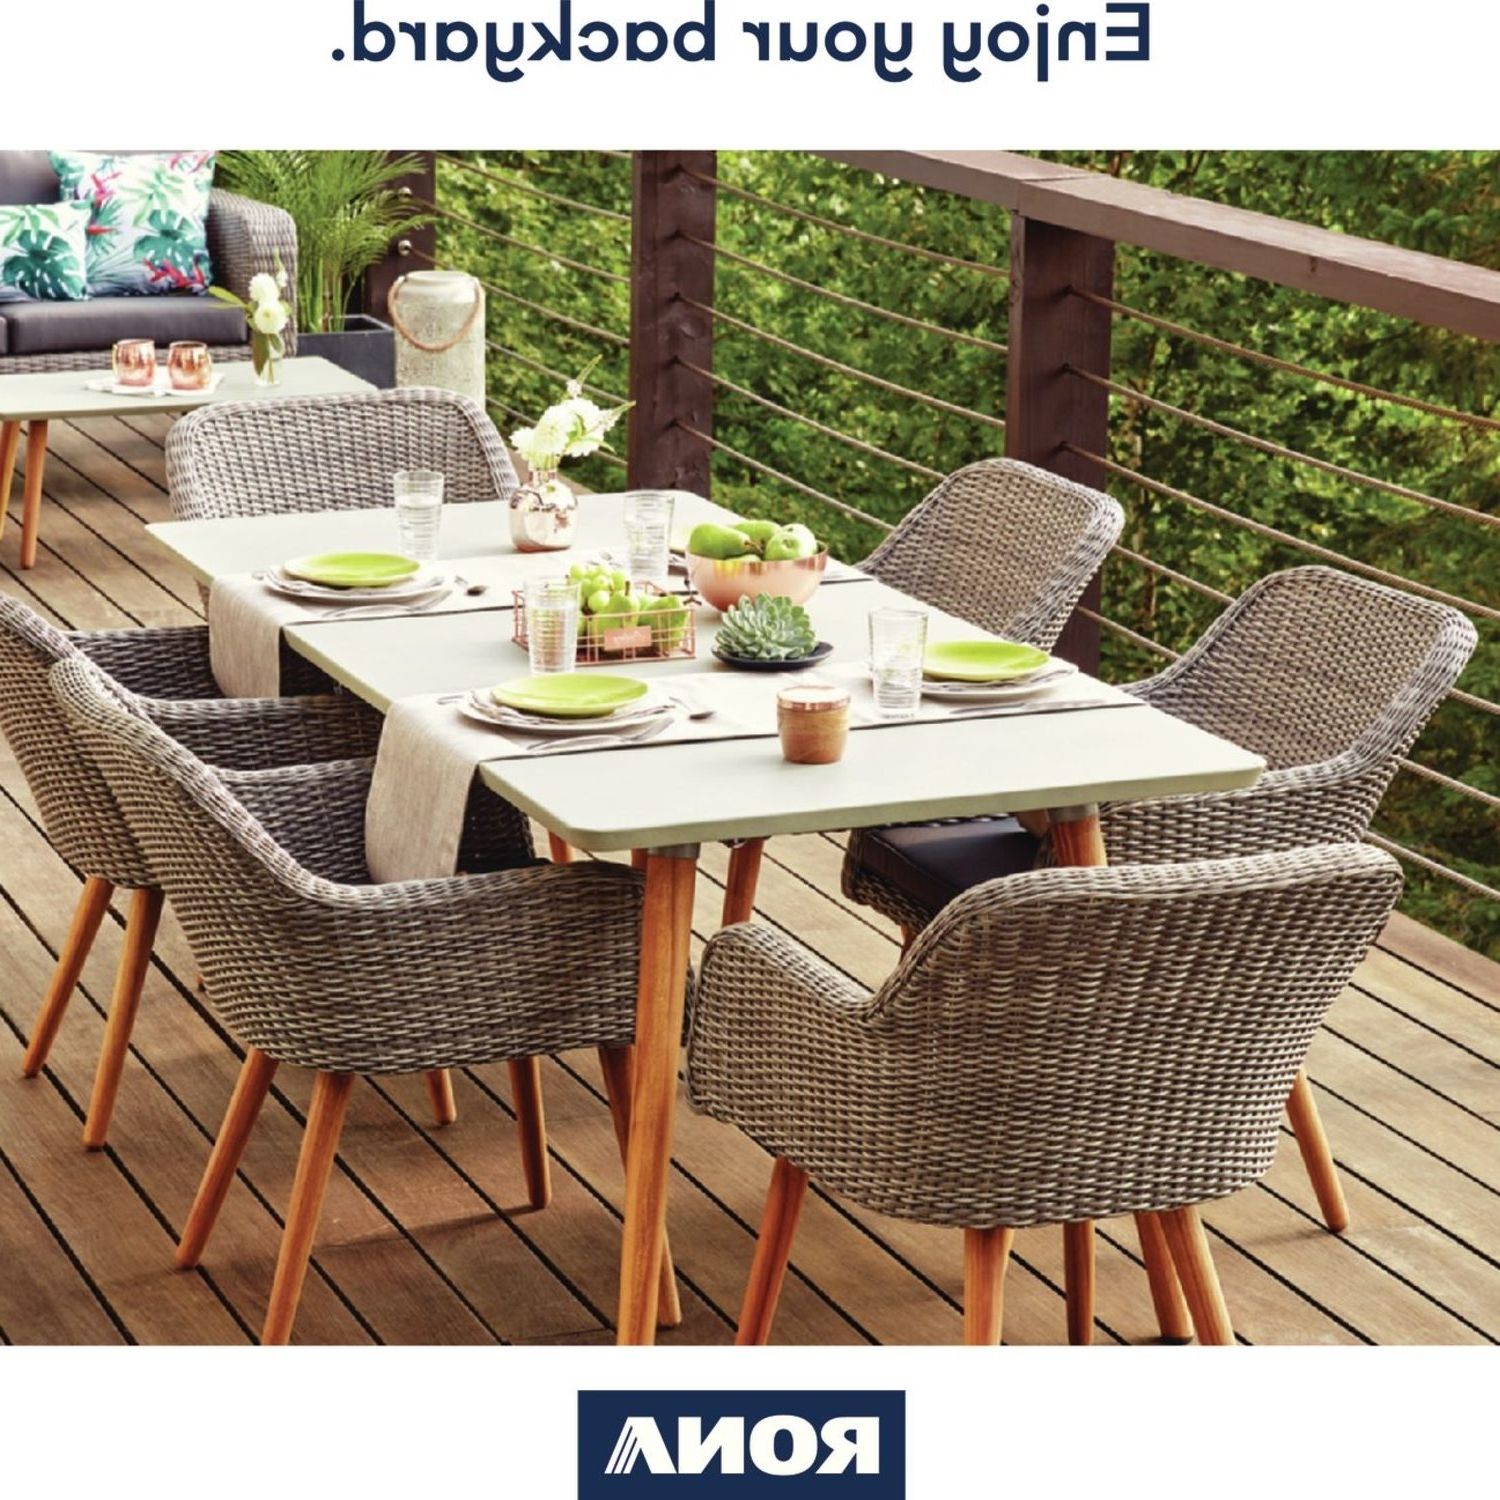 Popular Rona Weekly Flyer – Enjoy Your Backyard – Mar 22 – Apr 25 Intended For Rona Patio Rocking Chairs (View 1 of 15)